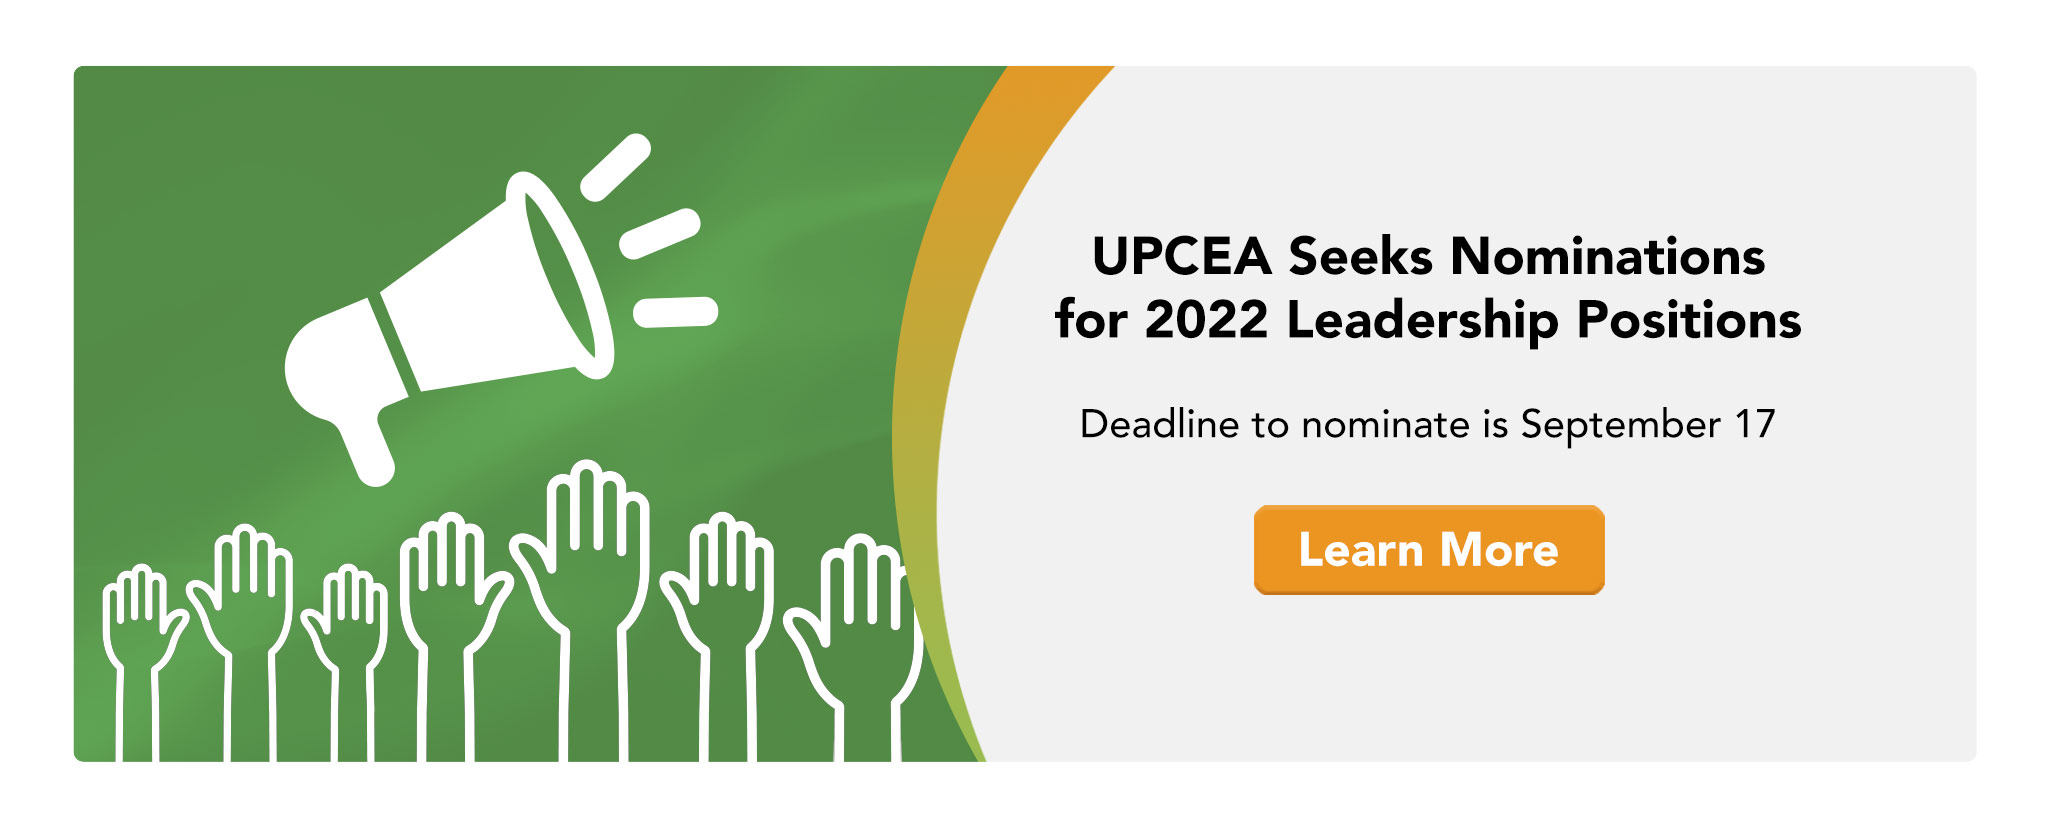 UPCEA Seeks Nominations for 2022 Leadership Positions | Deadline to nominate is September 17